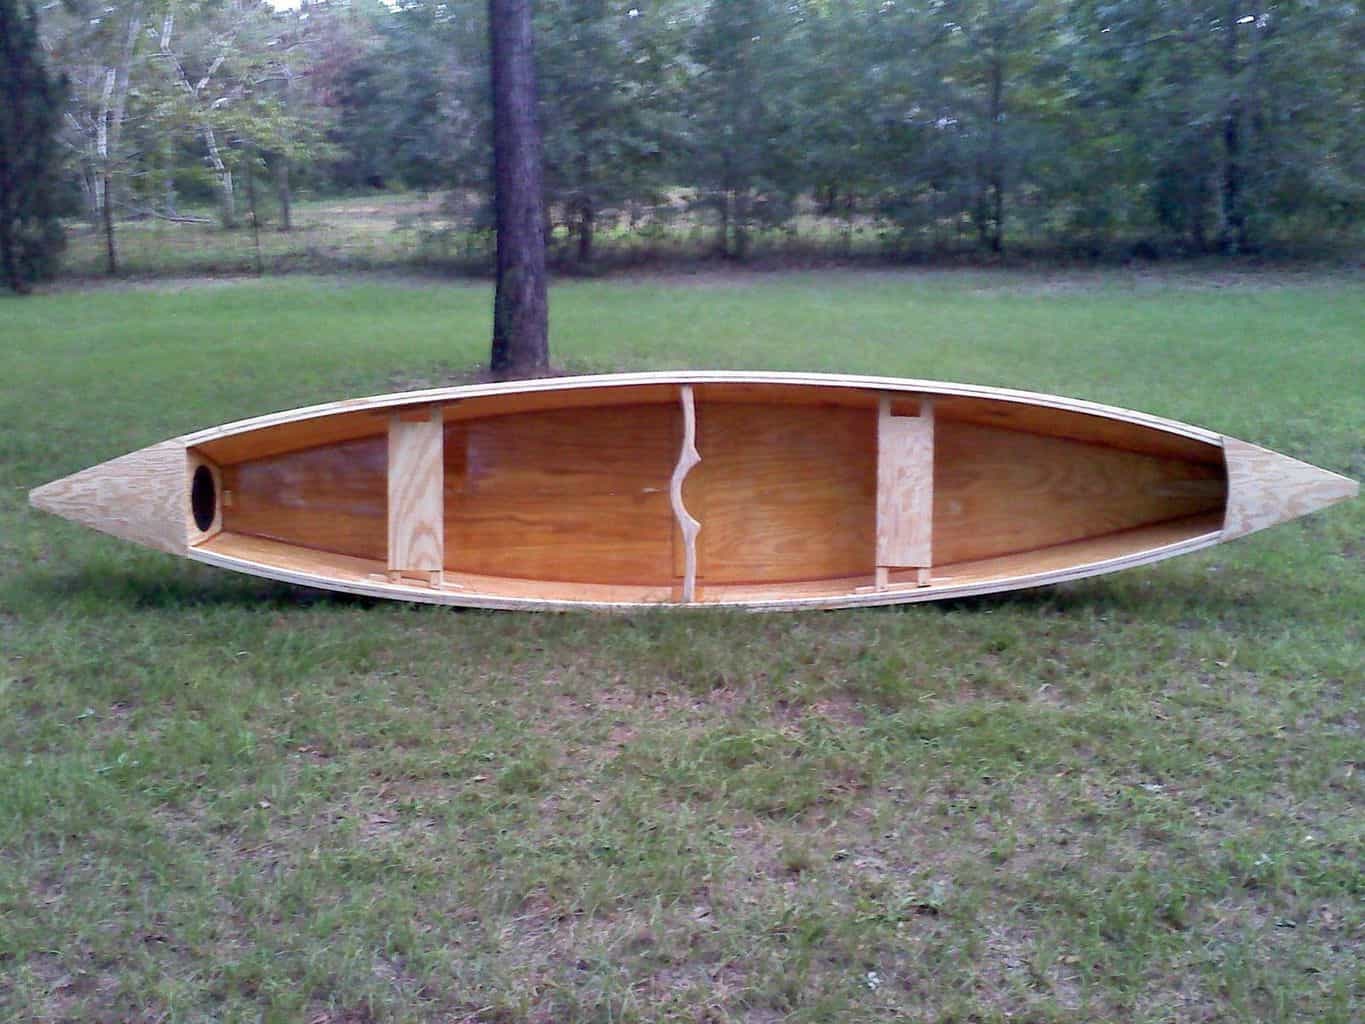 As you can see, there’s no reason for a very simple canoe to look 